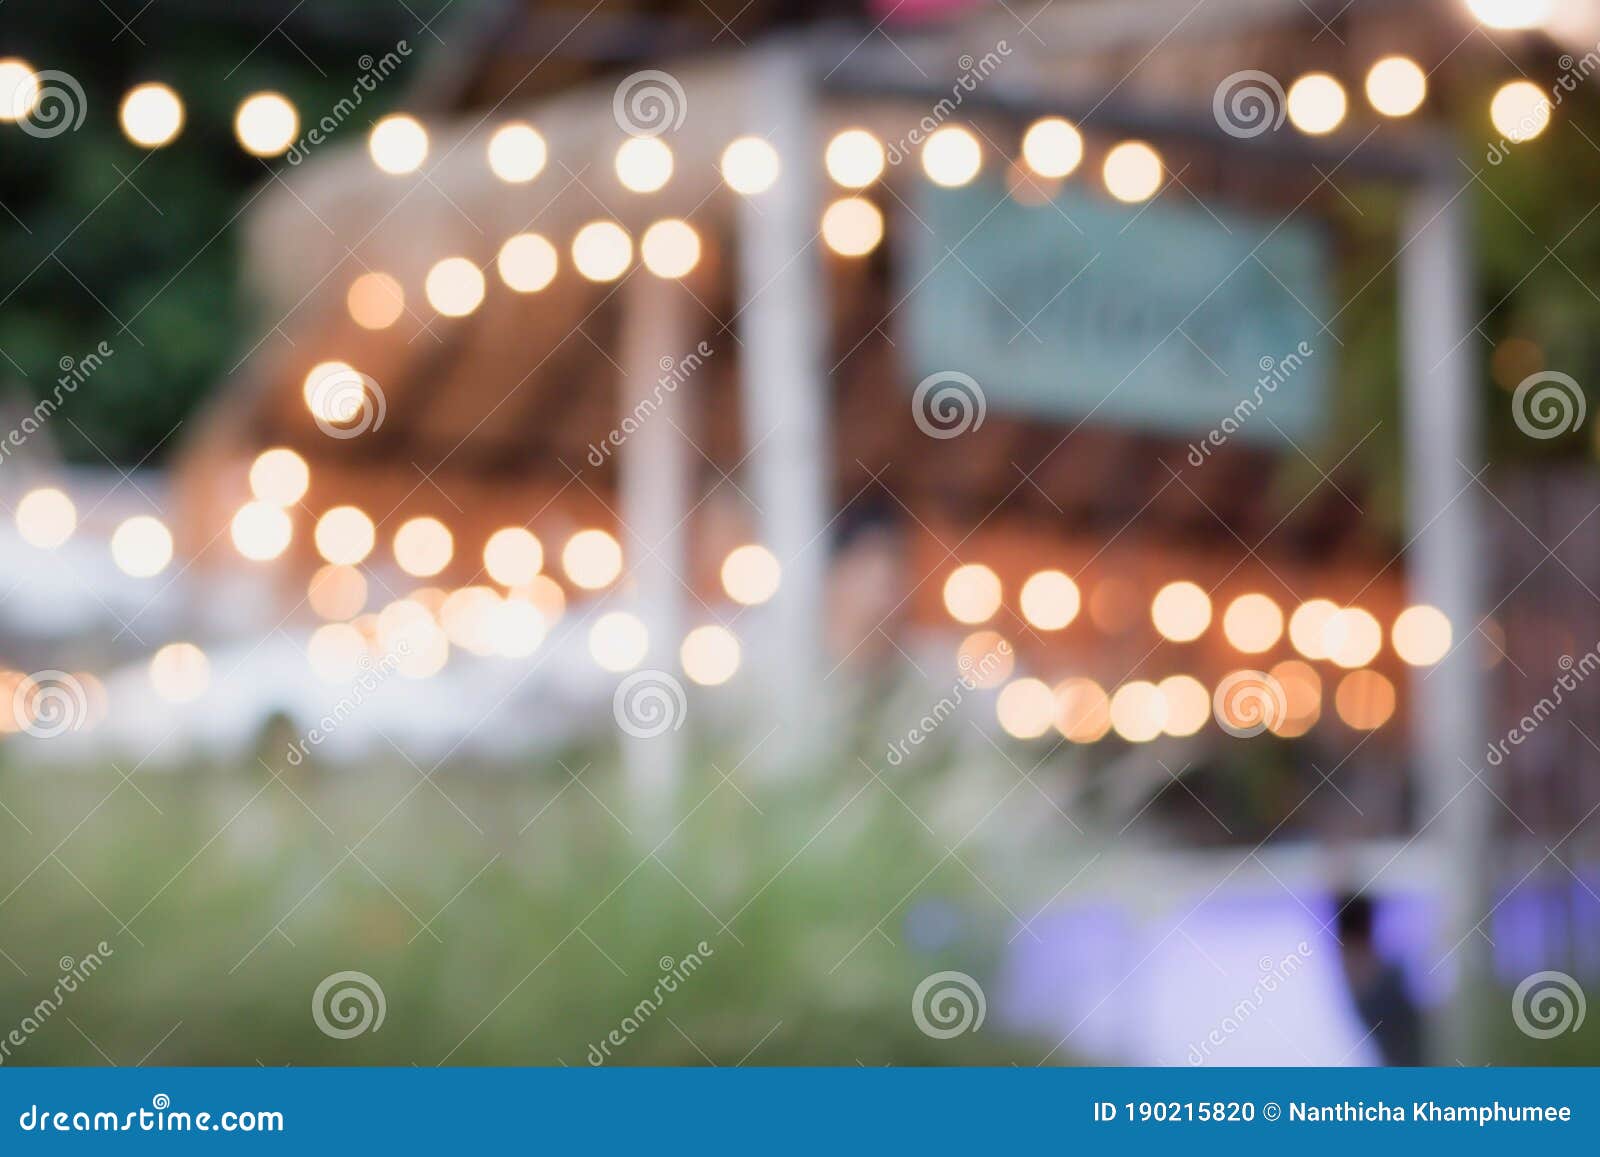 Blur The Lights On The Beach Restaurant In Siracha Thailand Blurred Cafe Background With Bokeh Bright Sea View Abstract Blur Stock Photo Image Of Resort Restaurant 190215820